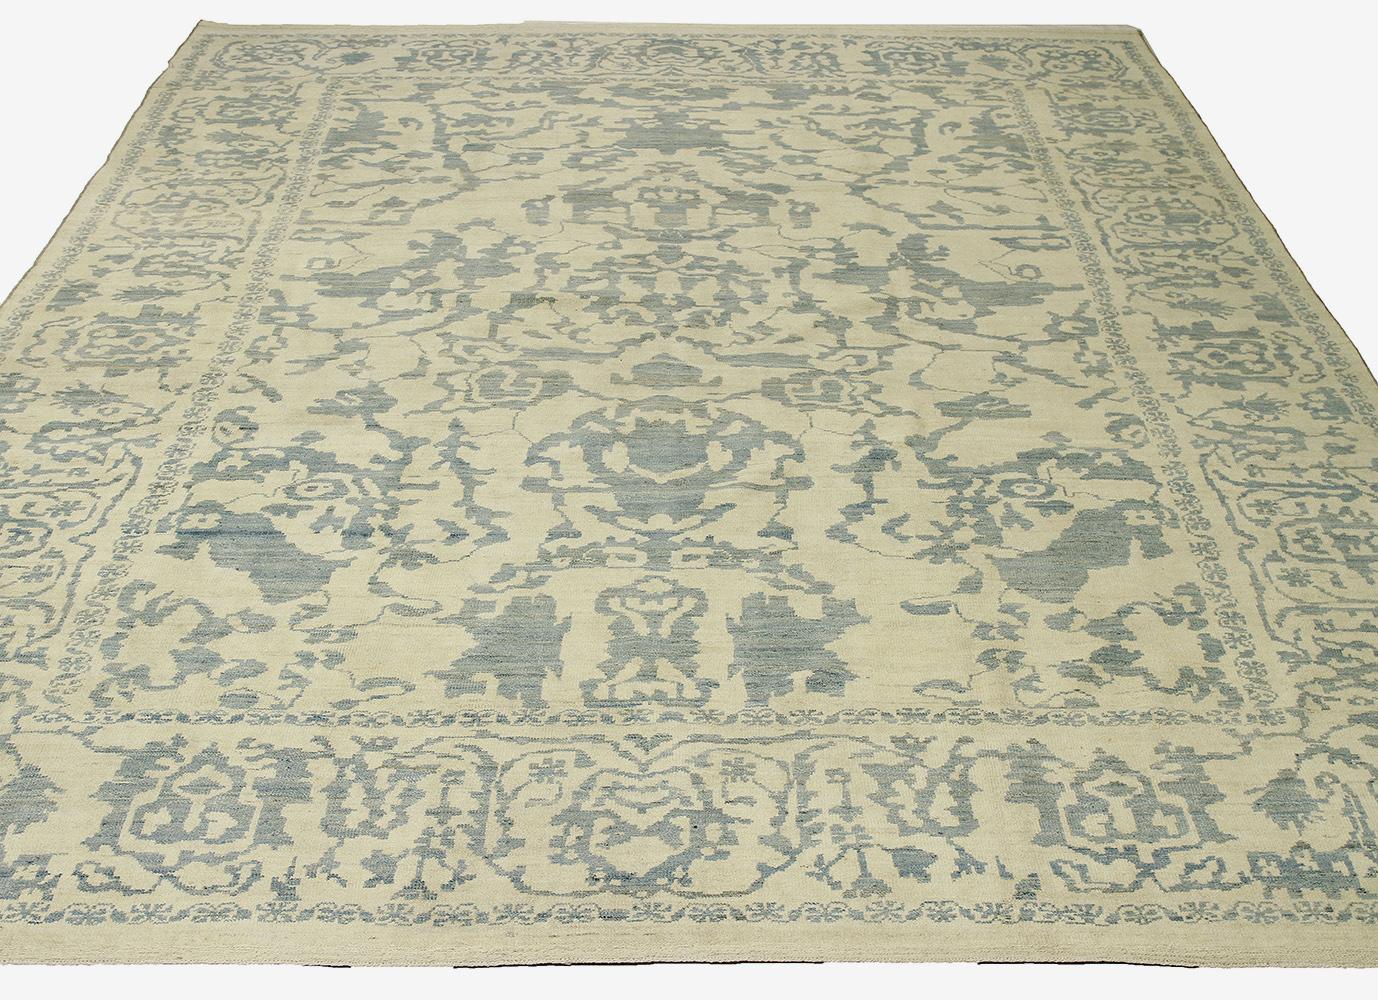 New Turkish rug made of handwoven sheep’s wool of the finest quality. It’s colored with organic vegetable dyes that are certified safe for humans and pets alike. It features flower details allover associated with Oushak weaving from ancient Anatolia